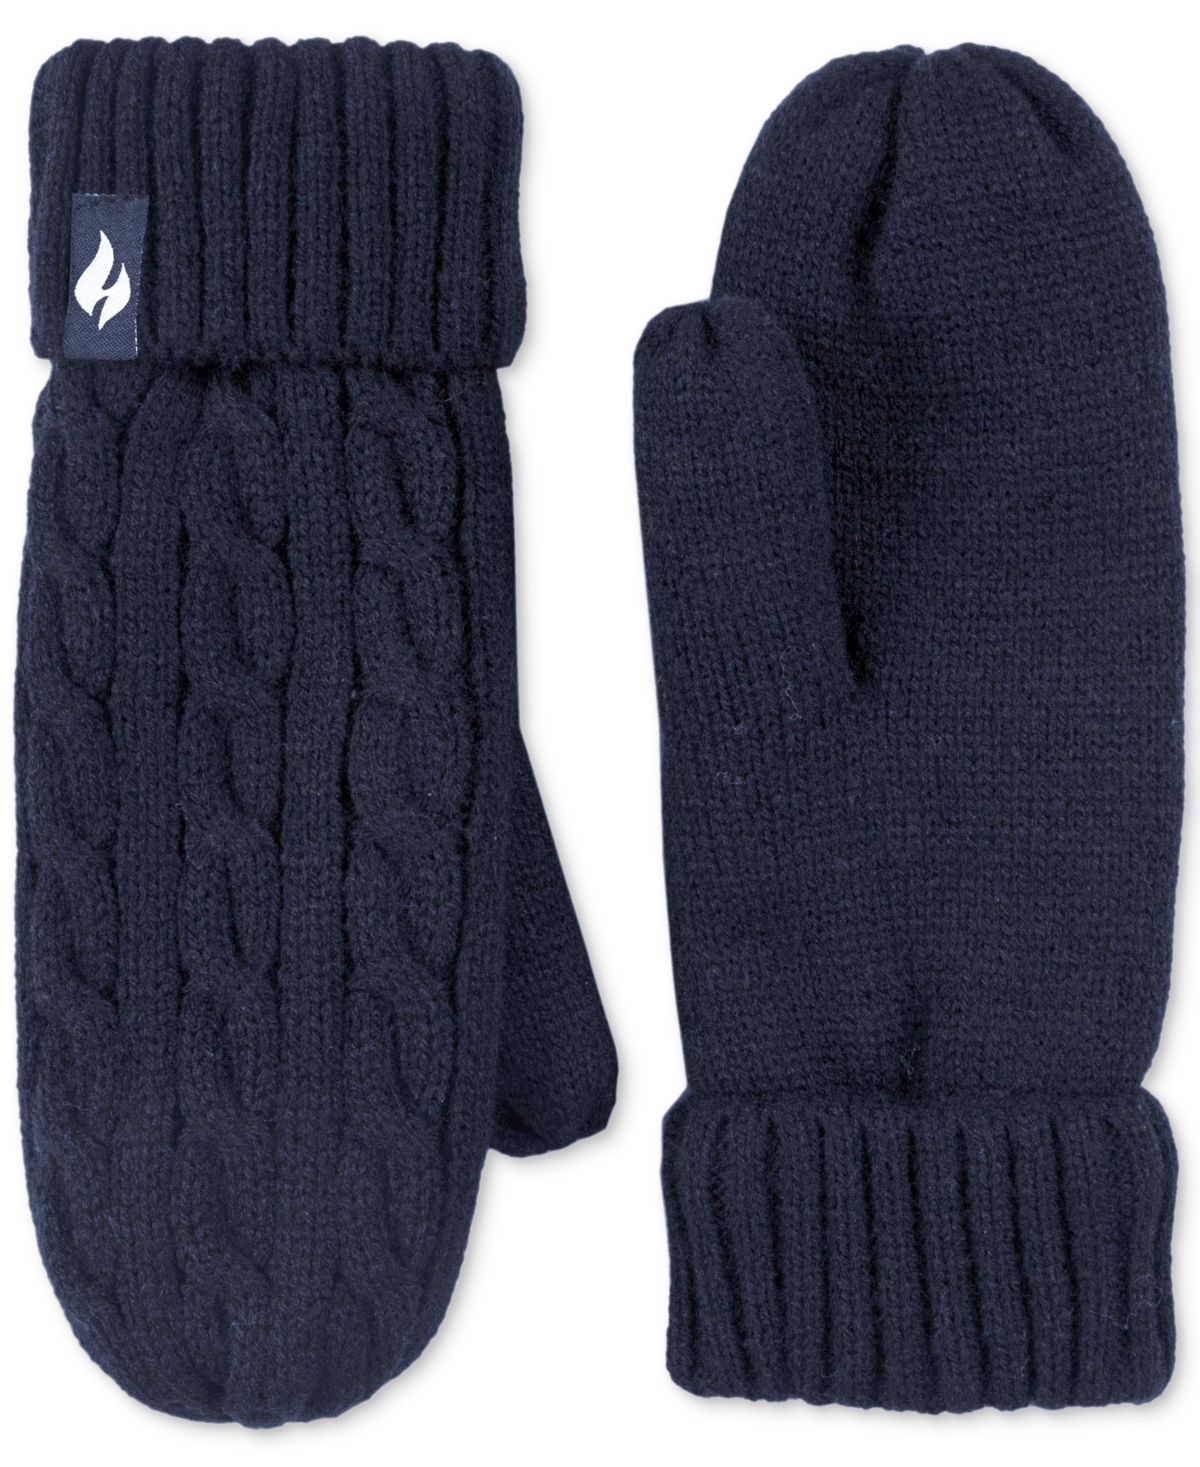 Jackie Cable Knit Mittens - Buttercream